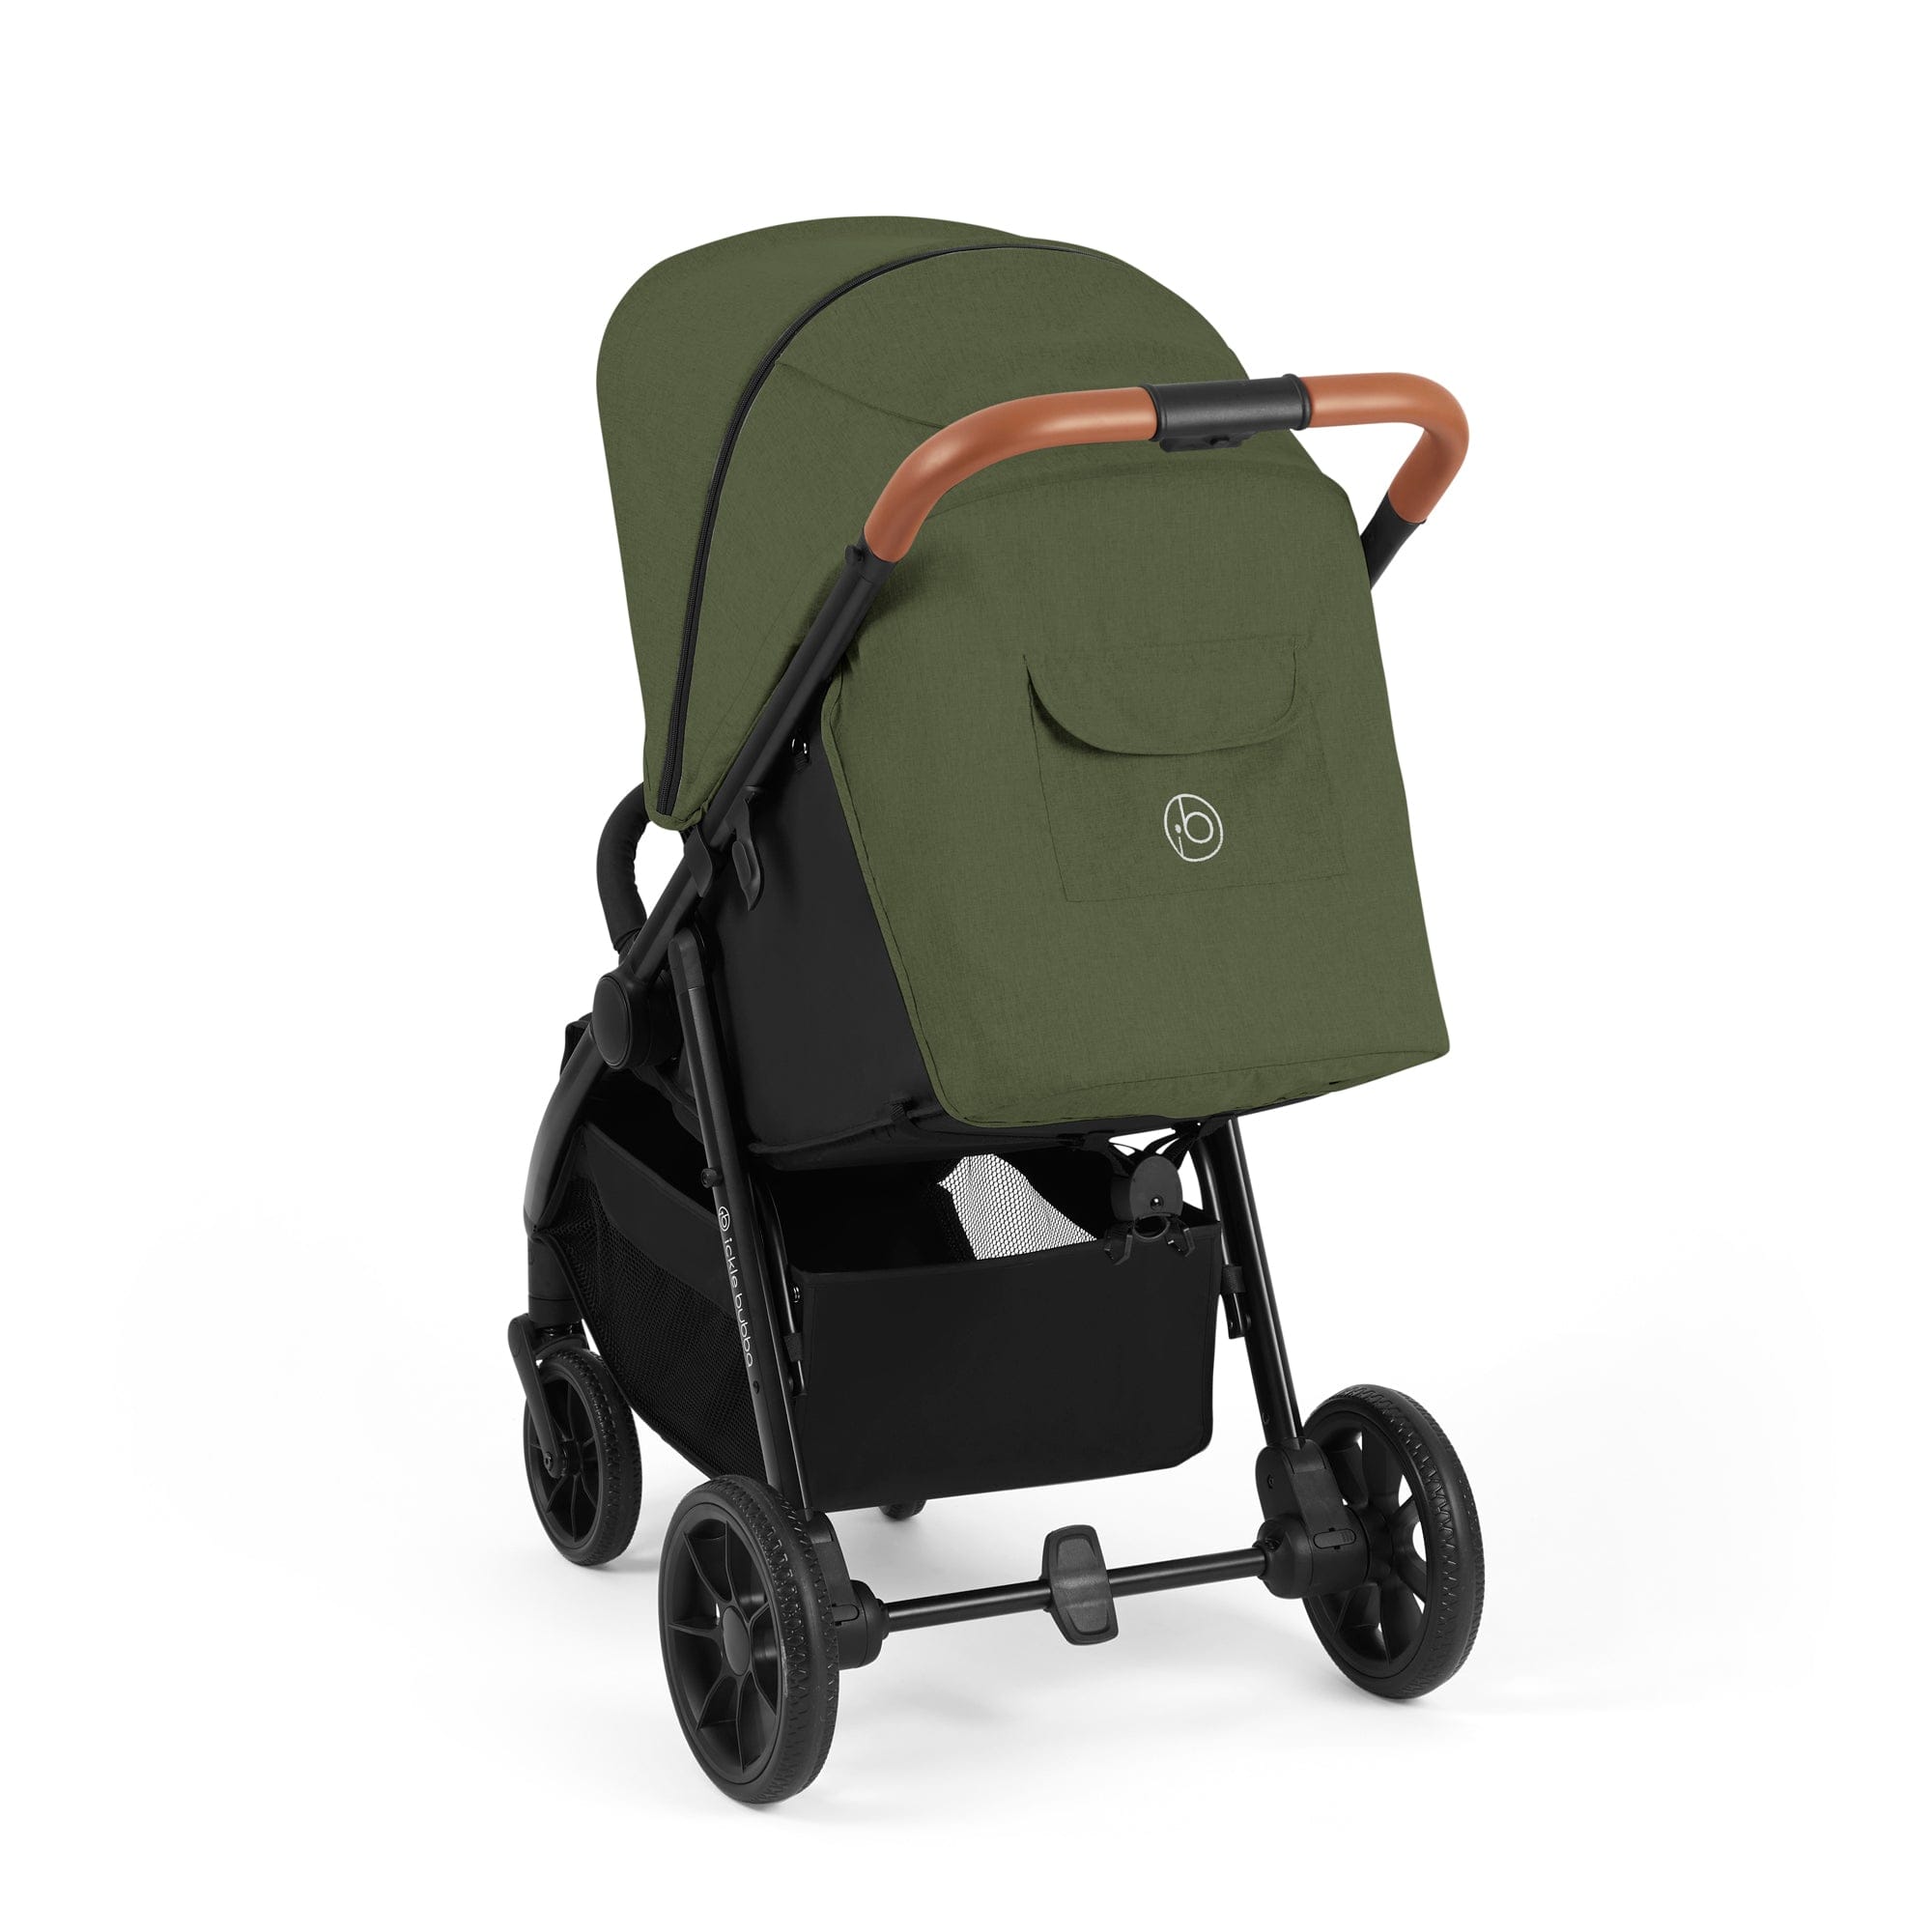 Ickle Bubba Pushchairs & Buggies STOMP STRIDE PRIME Pushchair (Woodland) 15-006-300-066